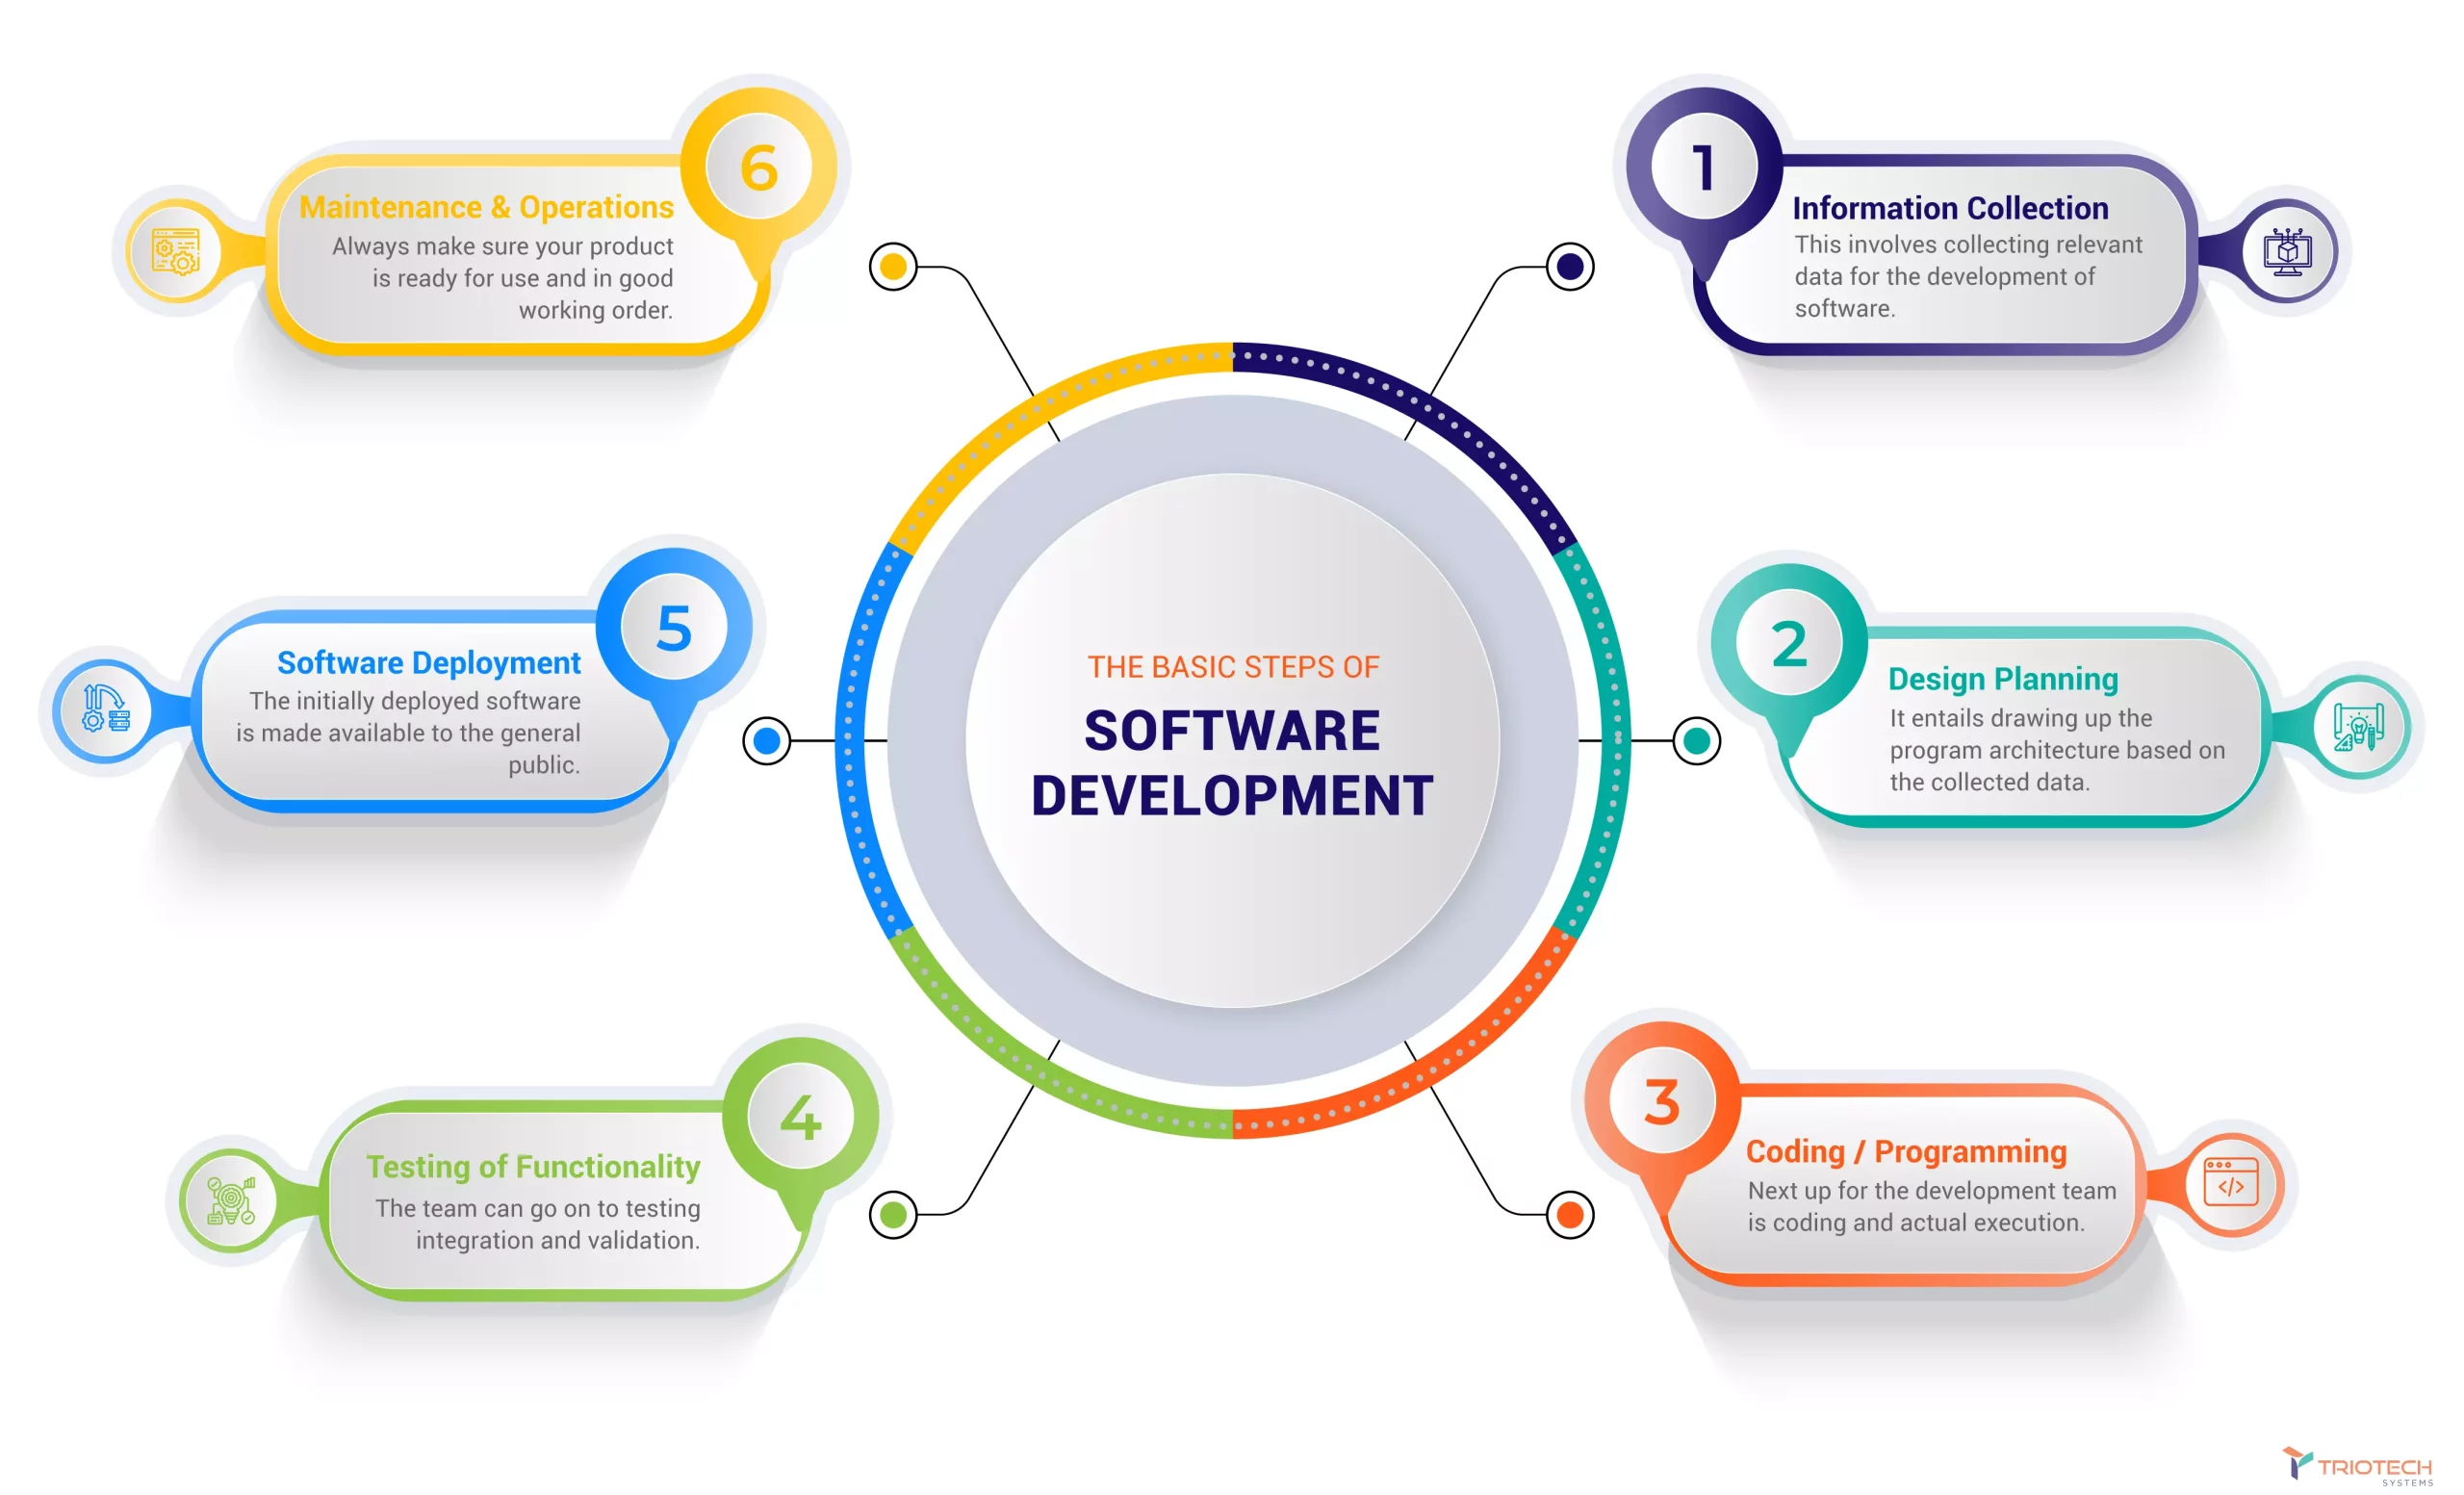 The basic steps of software development service